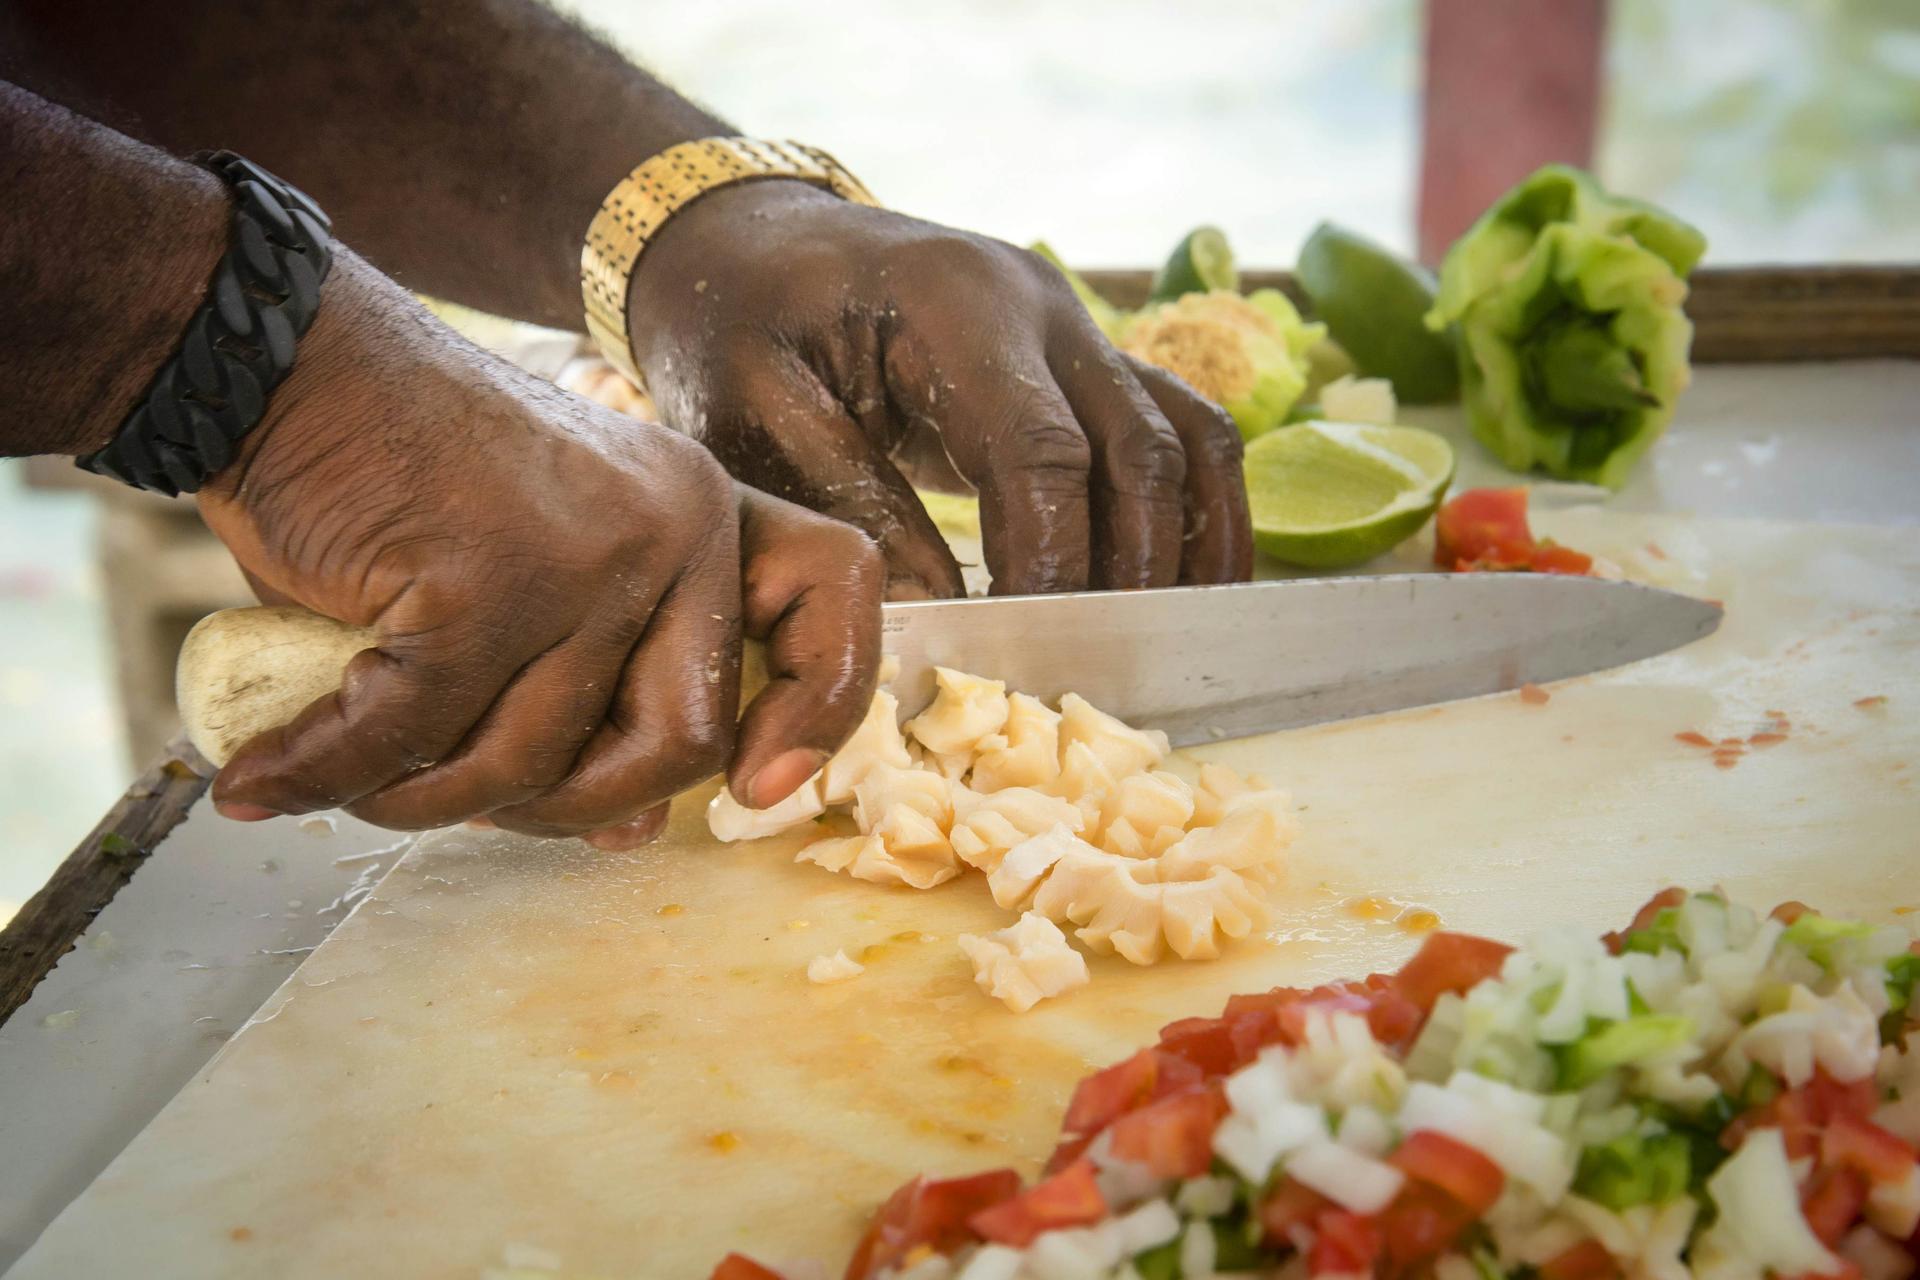 Making conch salad on the street